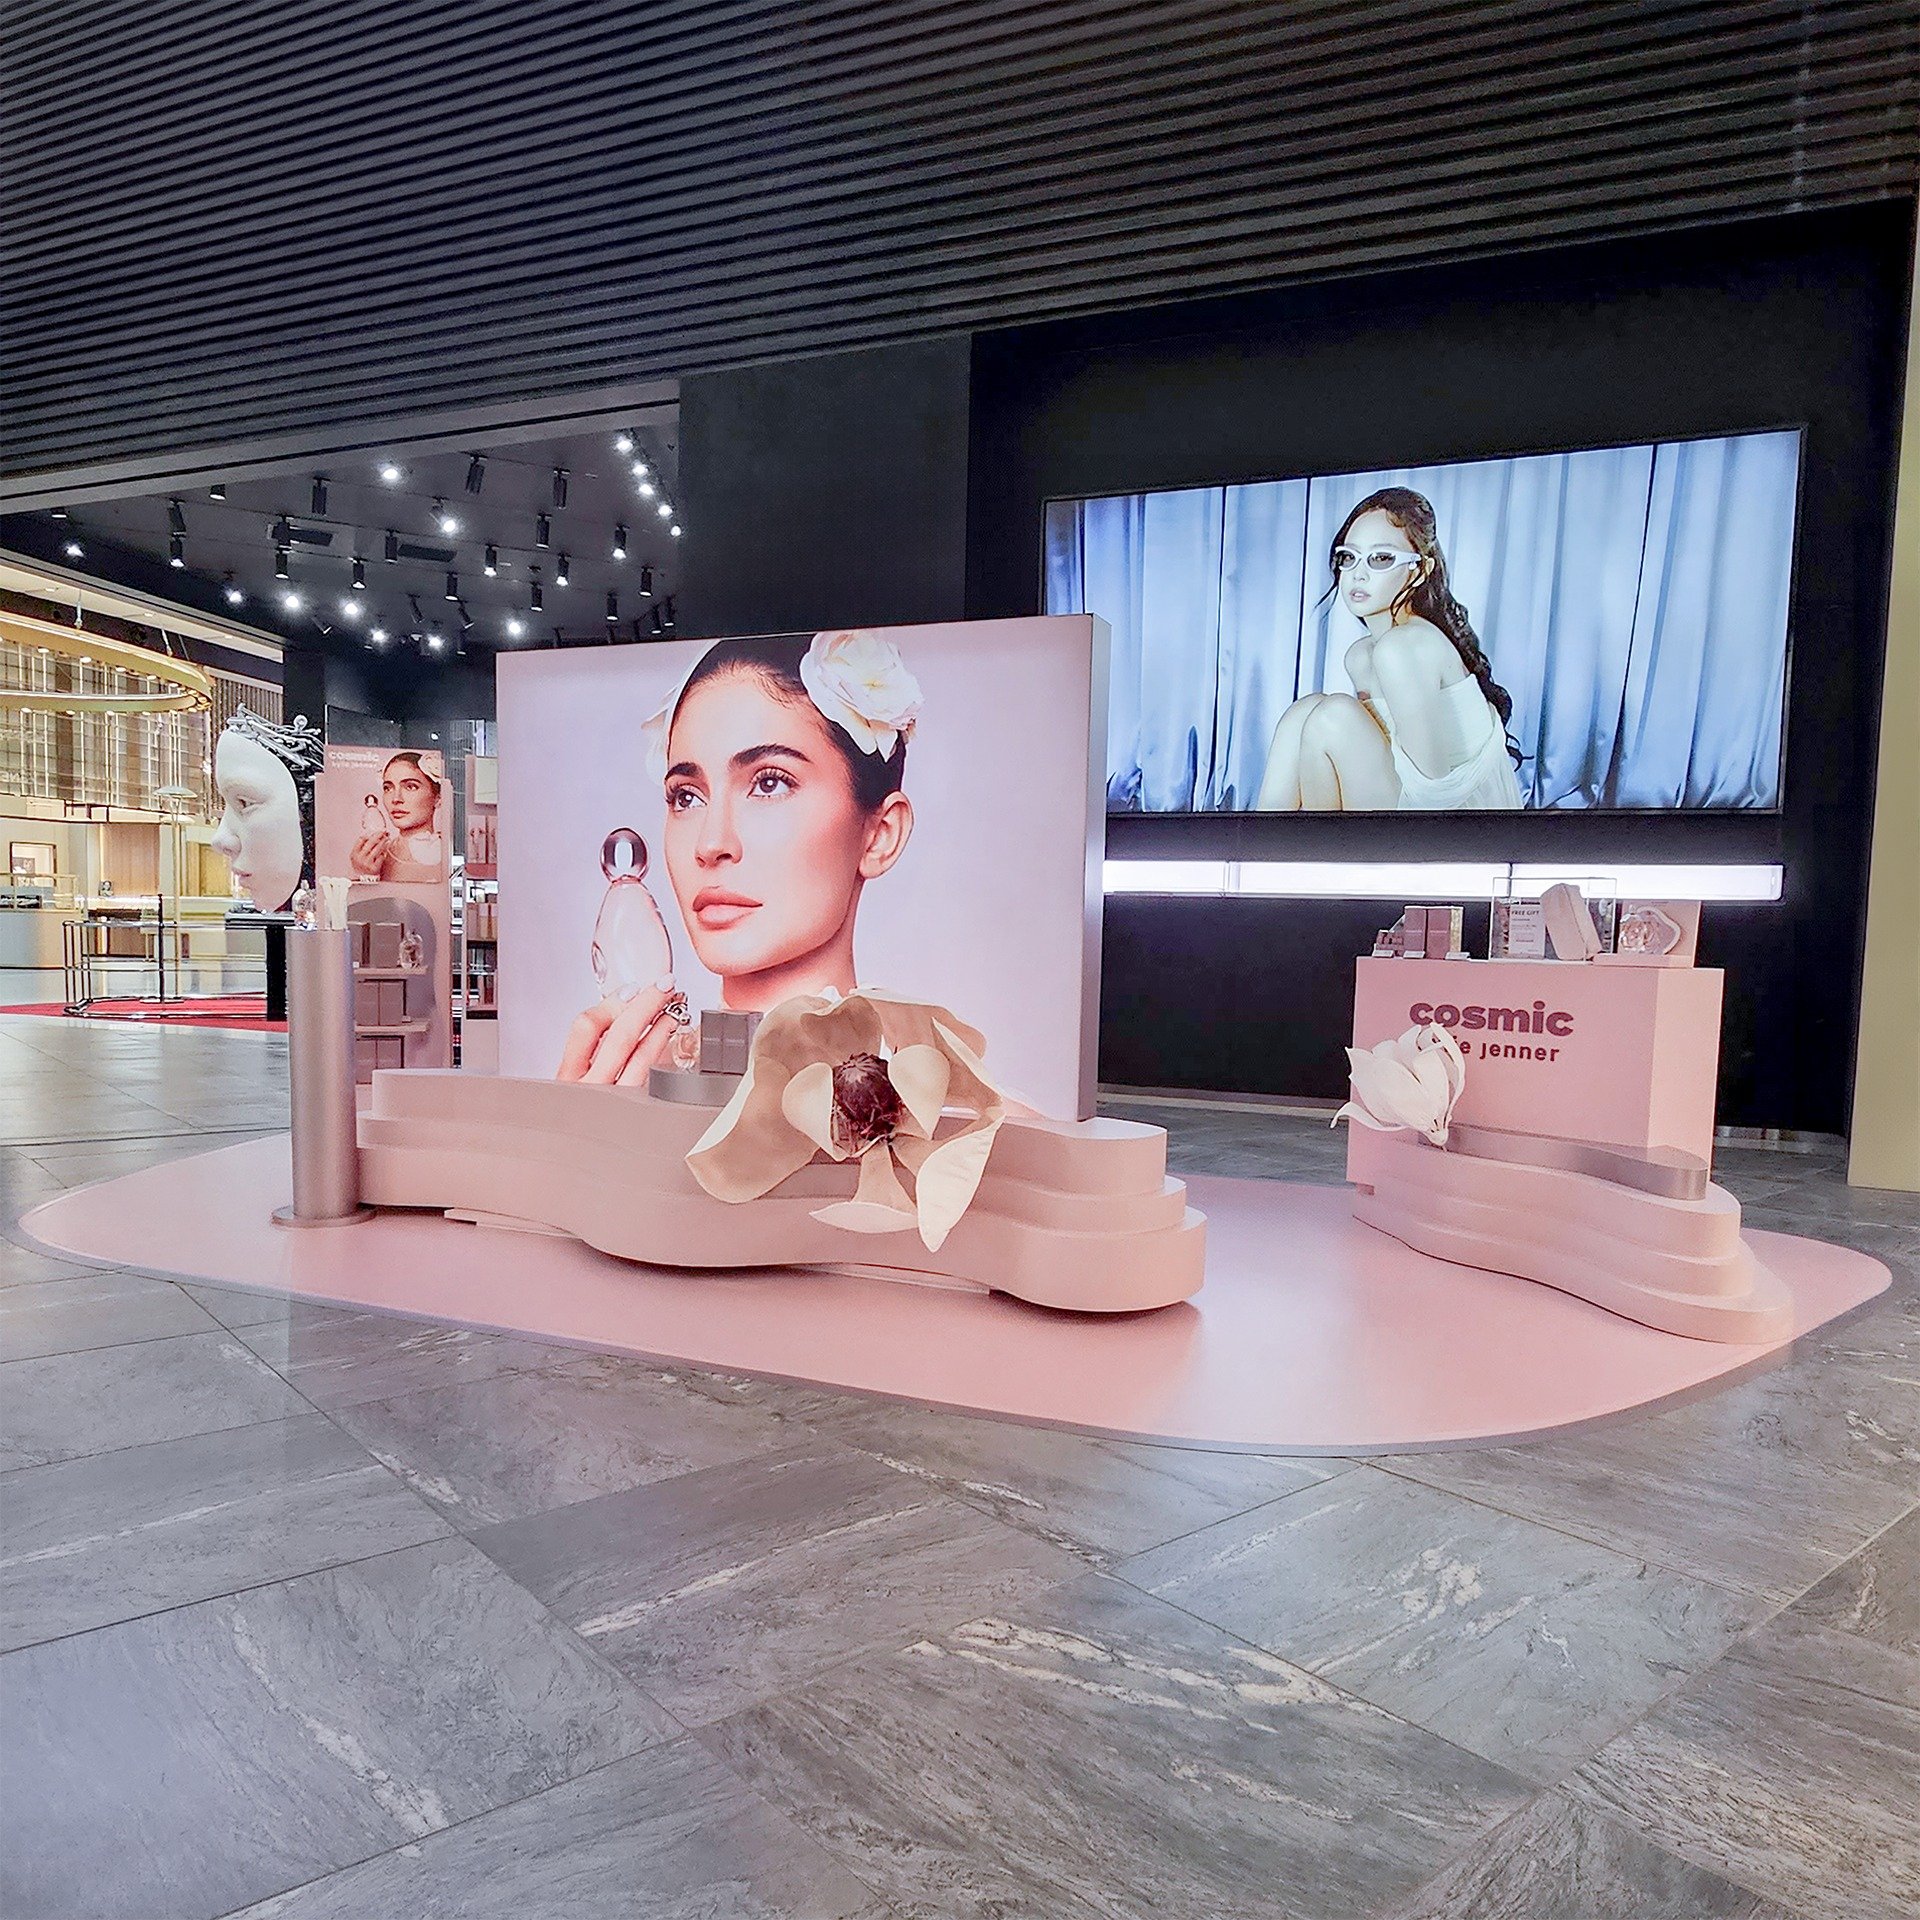 Bringing the blossoms to the blush #CosmicKylie #EaudeParfum #popupevent at #SydneyAirport for @@cotydutyfree_anz. 🌸

Installation: @artandsoul.com.au
Spatial design &amp; Fabrication: @artandsoul.com.au